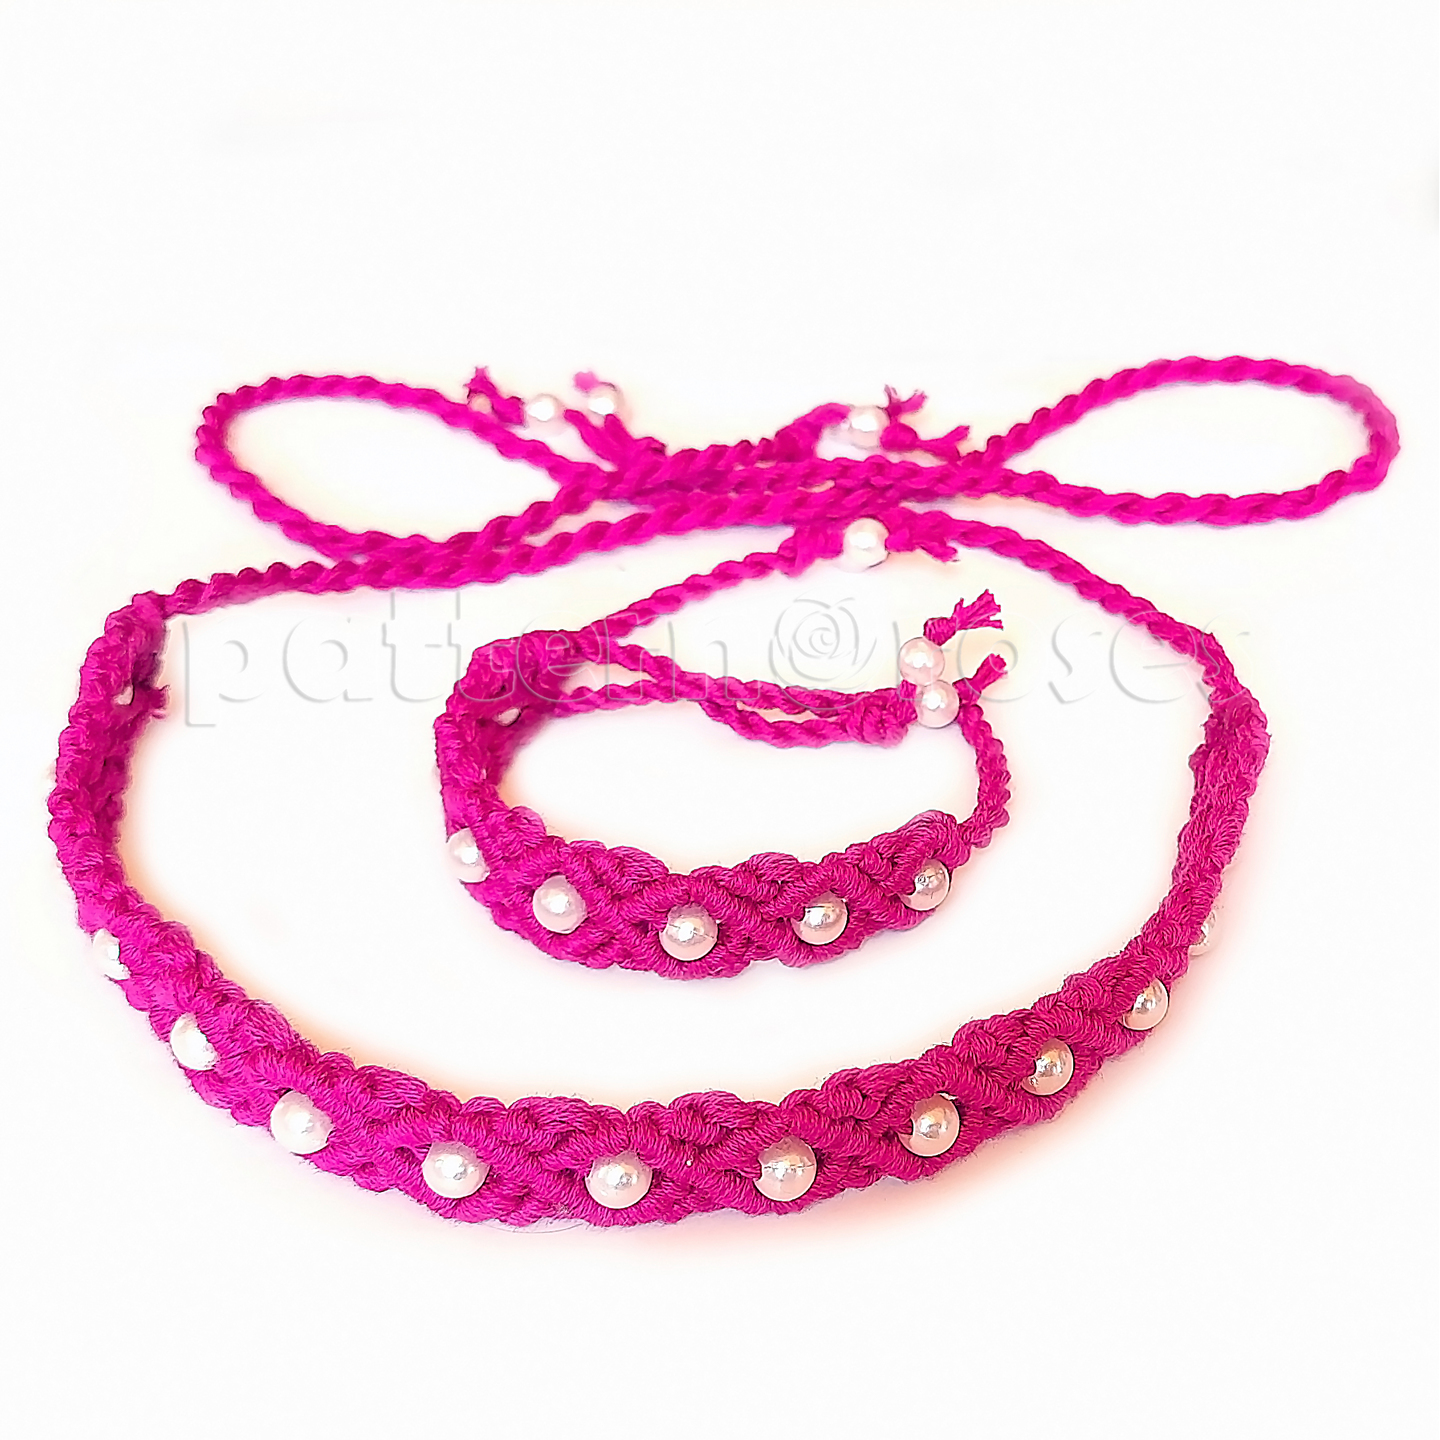 Macrame Head Band and Bracelet Combo for kids